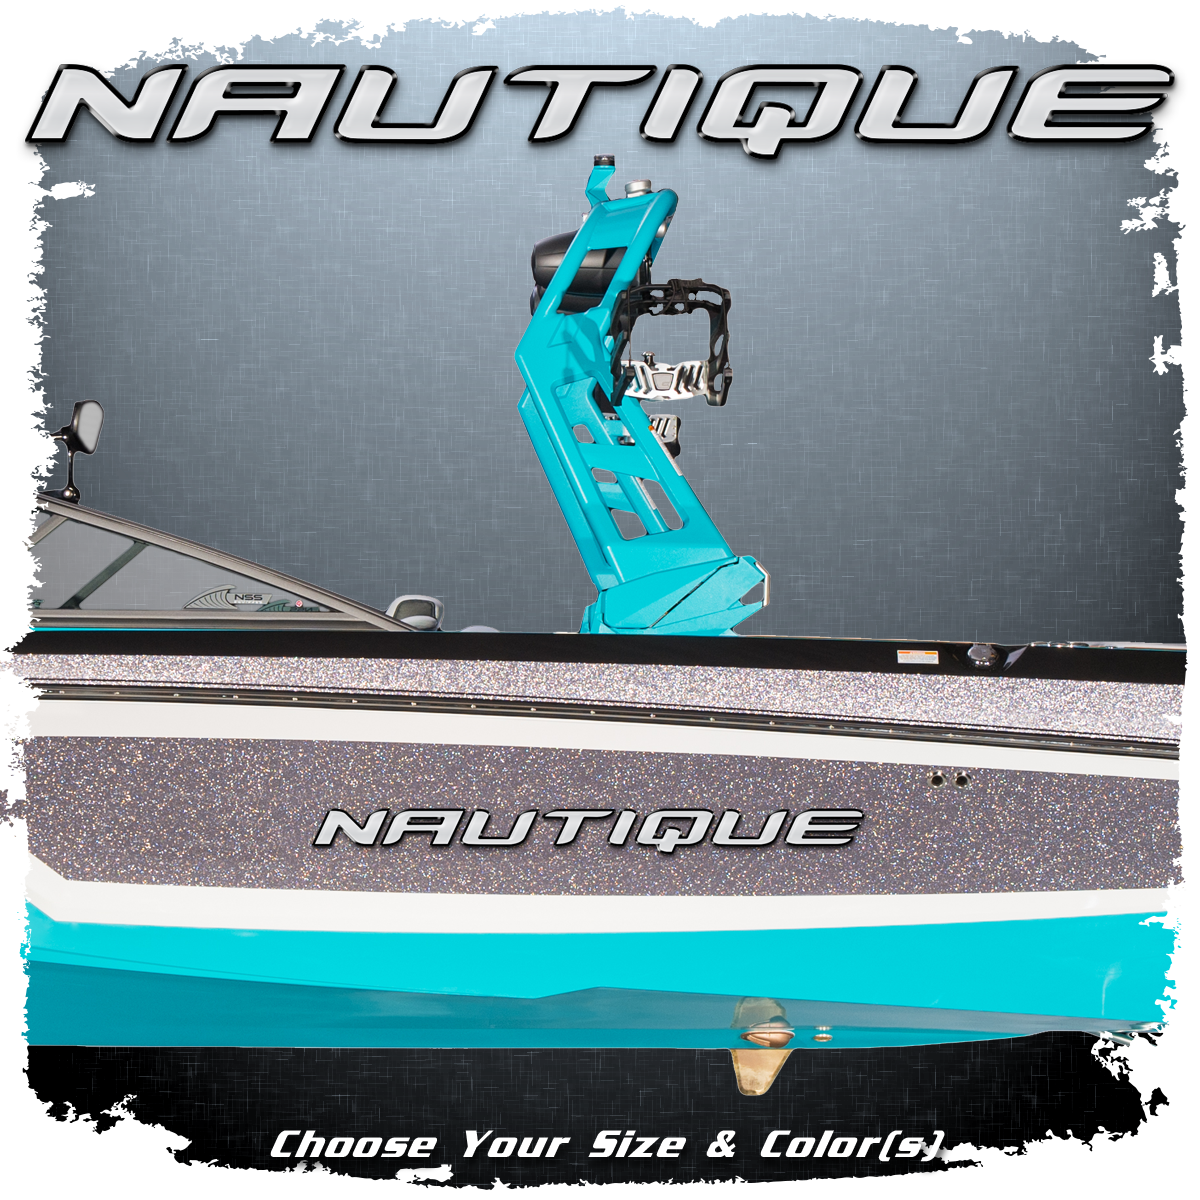 Domed Nautique Decal, Choose Your Size & Colors (1 included)